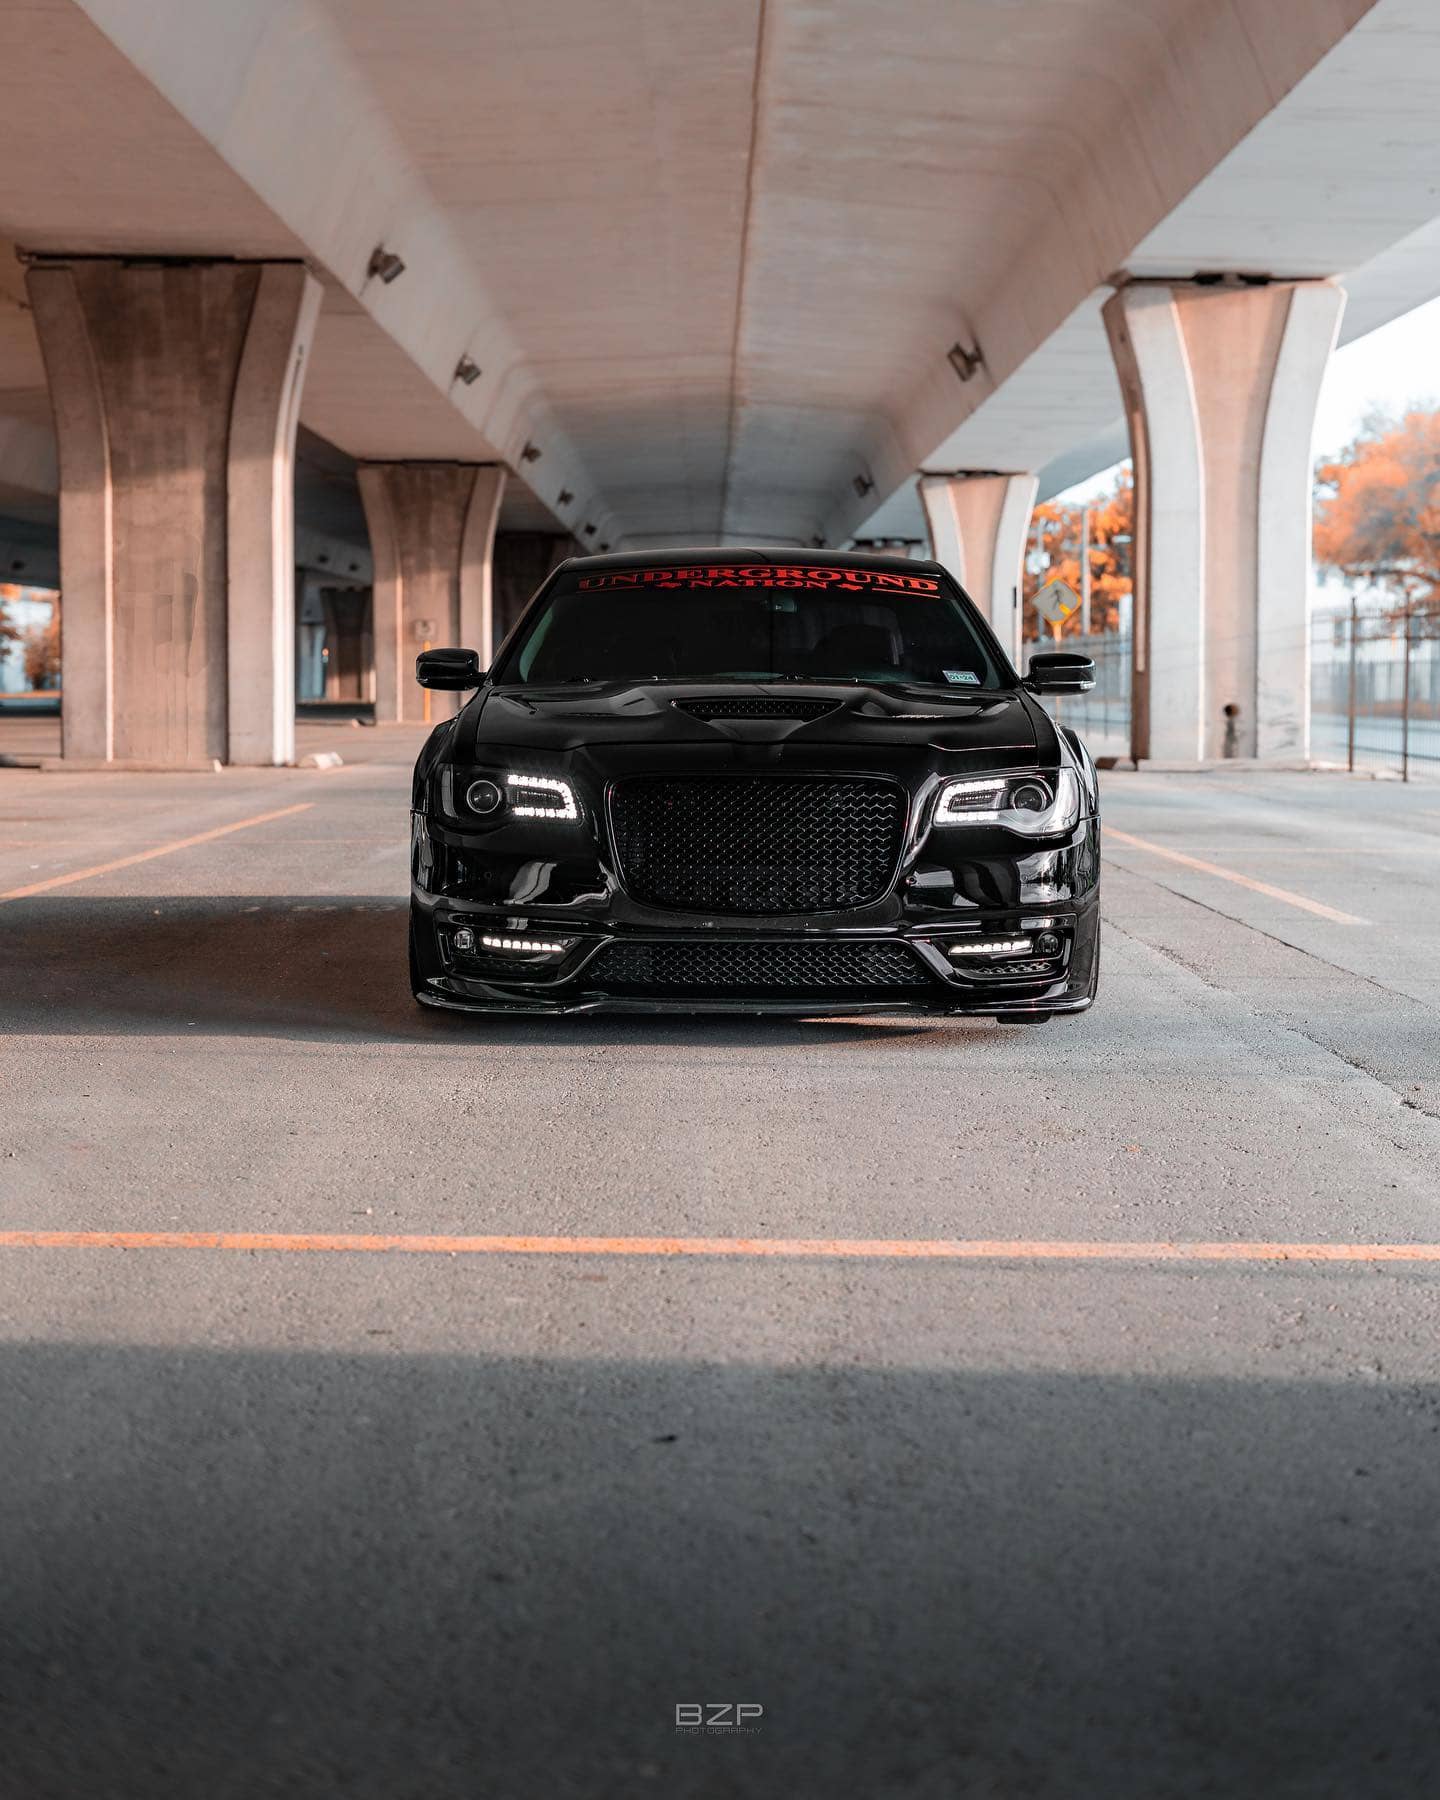 modded and blacked out front end of the Chrysler 300s